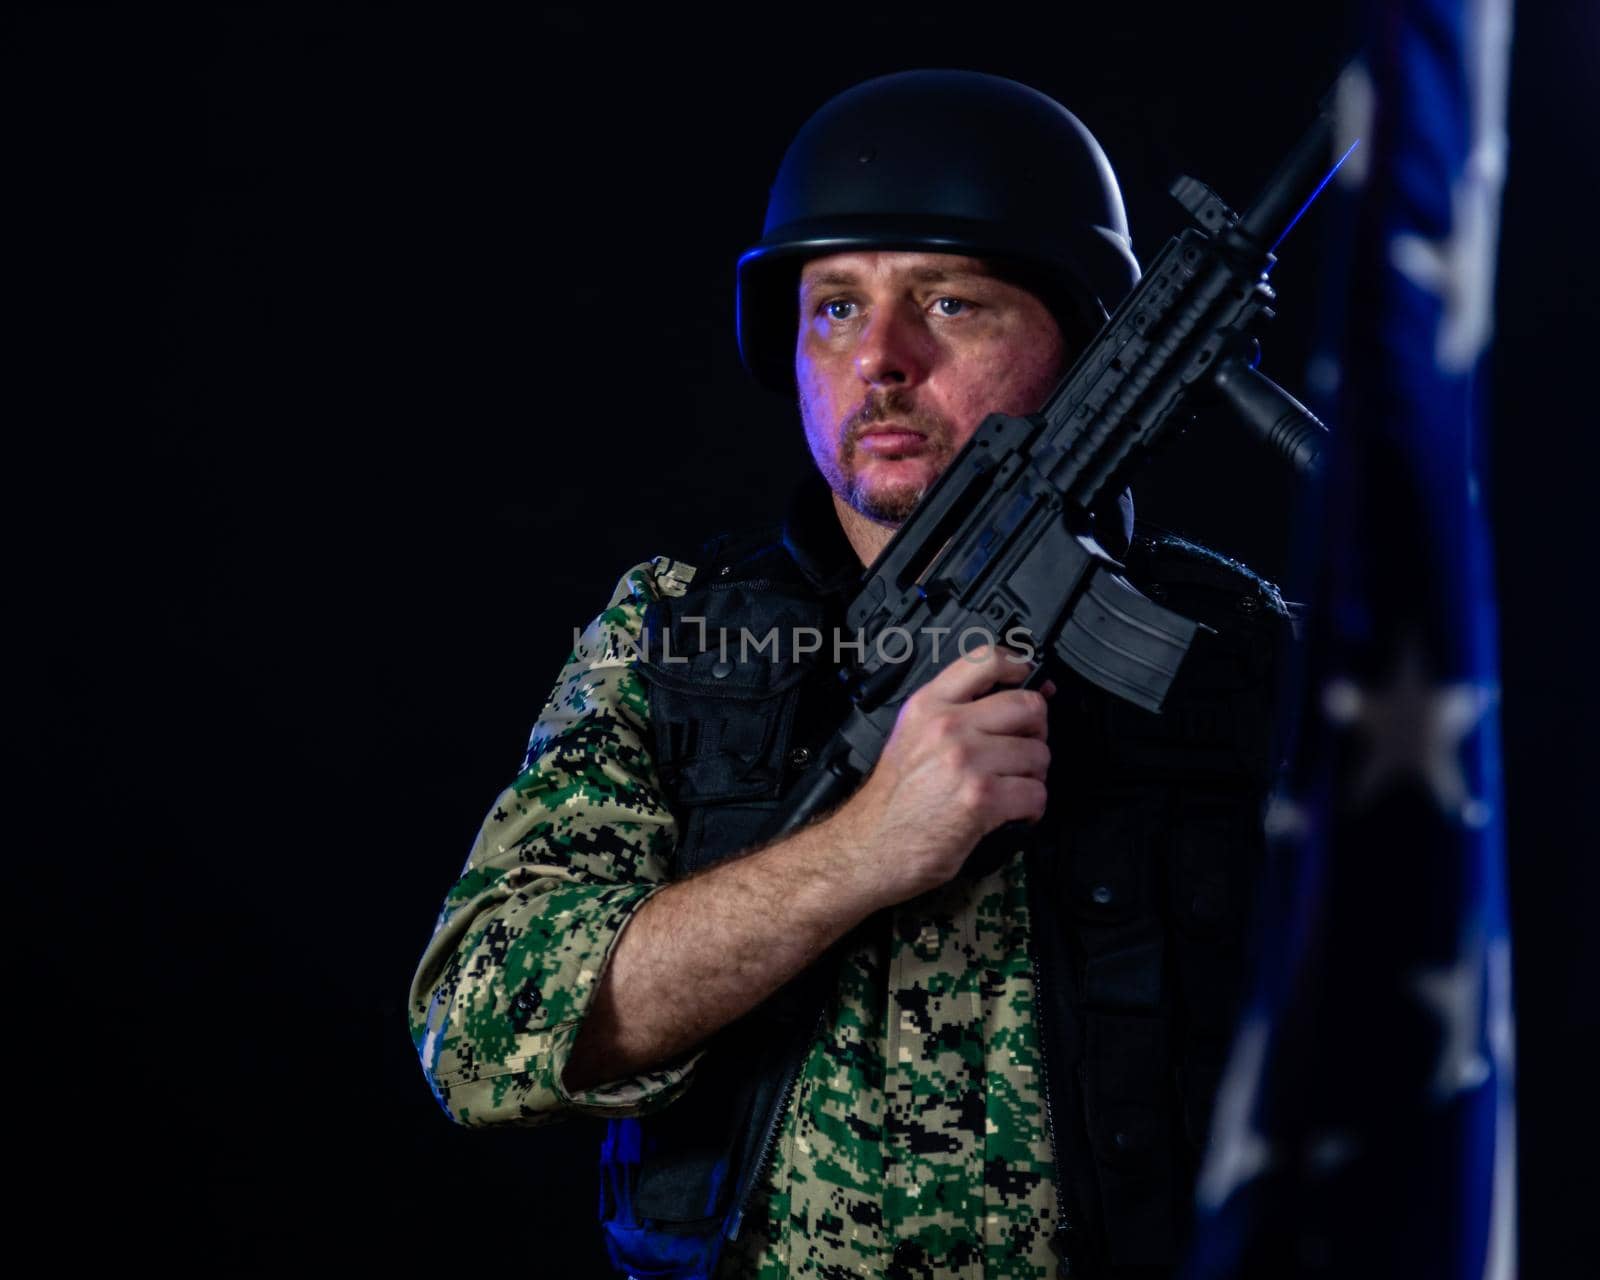 Soldier in army fatigues holding assault rifle and US flag